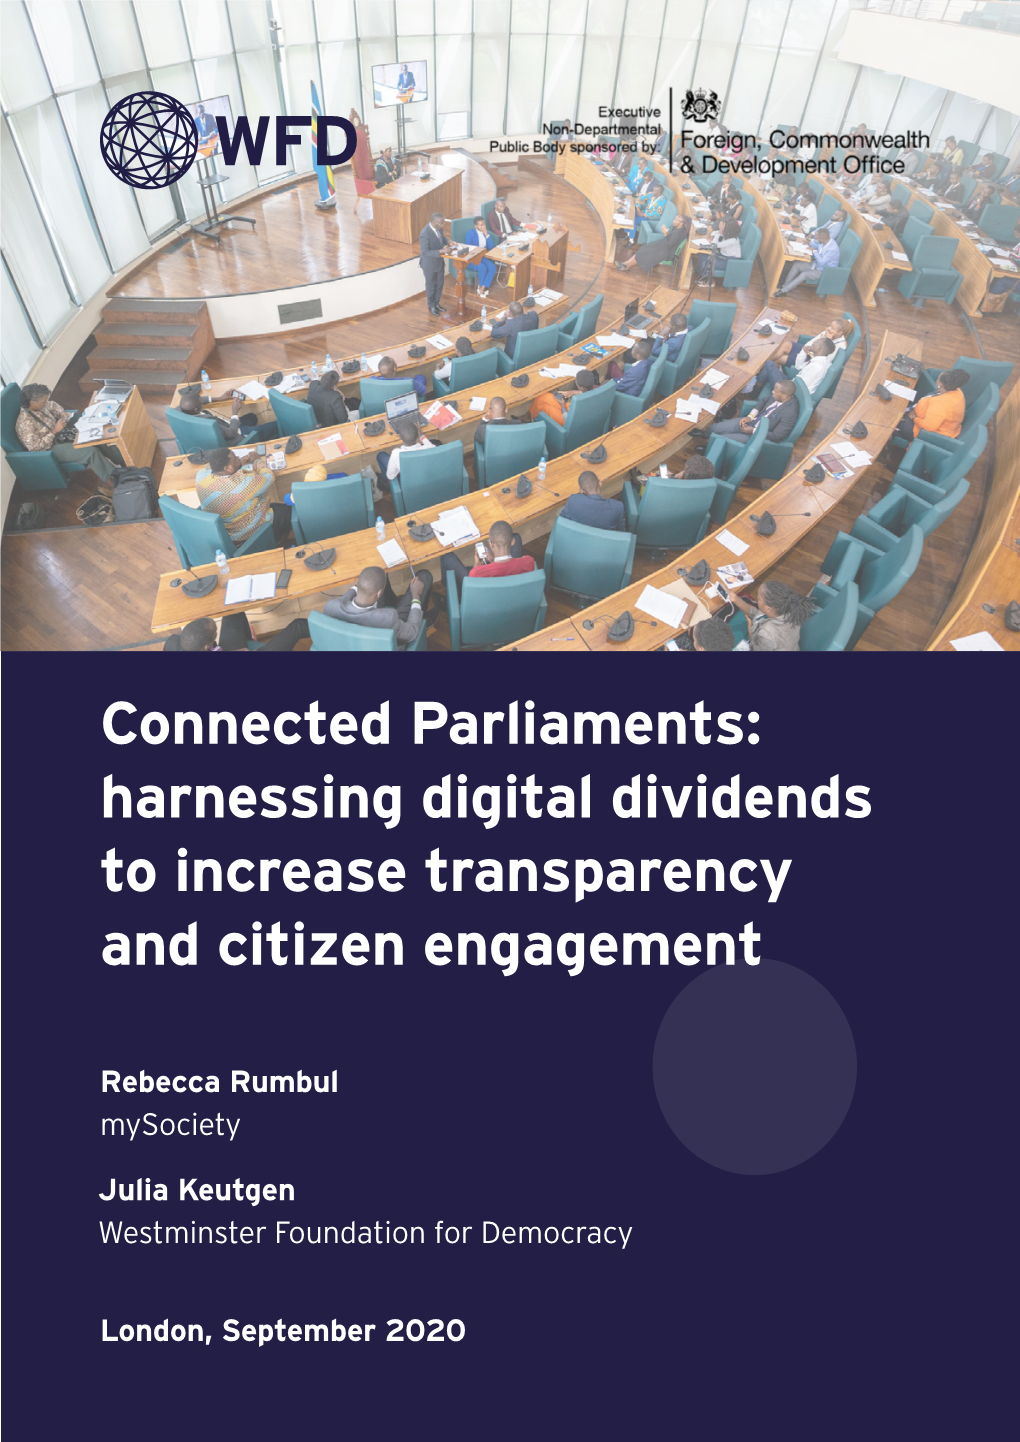 Connected Parliaments: Harnessing Digital Dividends to Increase Transparency and Citizen Engagement